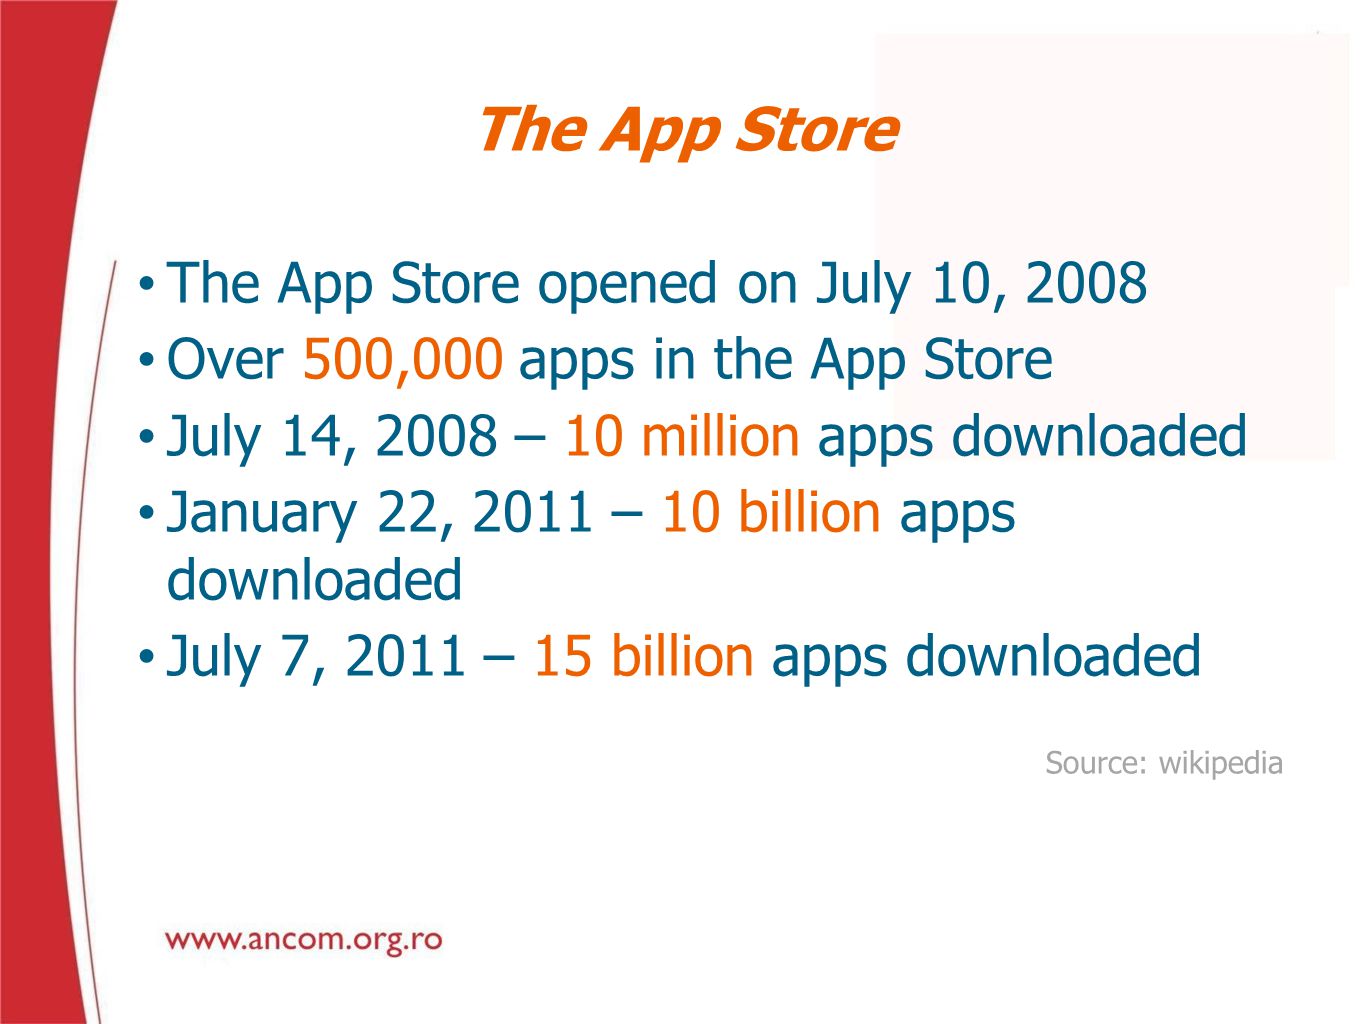 The App Store The App Store opened on July 10, 2008 Over 500,000 apps in the App Store July 14, 2008 – 10 million apps downloaded January 22, 2011 – 10 billion apps downloaded July 7, 2011 – 15 billion apps downloaded Source: wikipedia